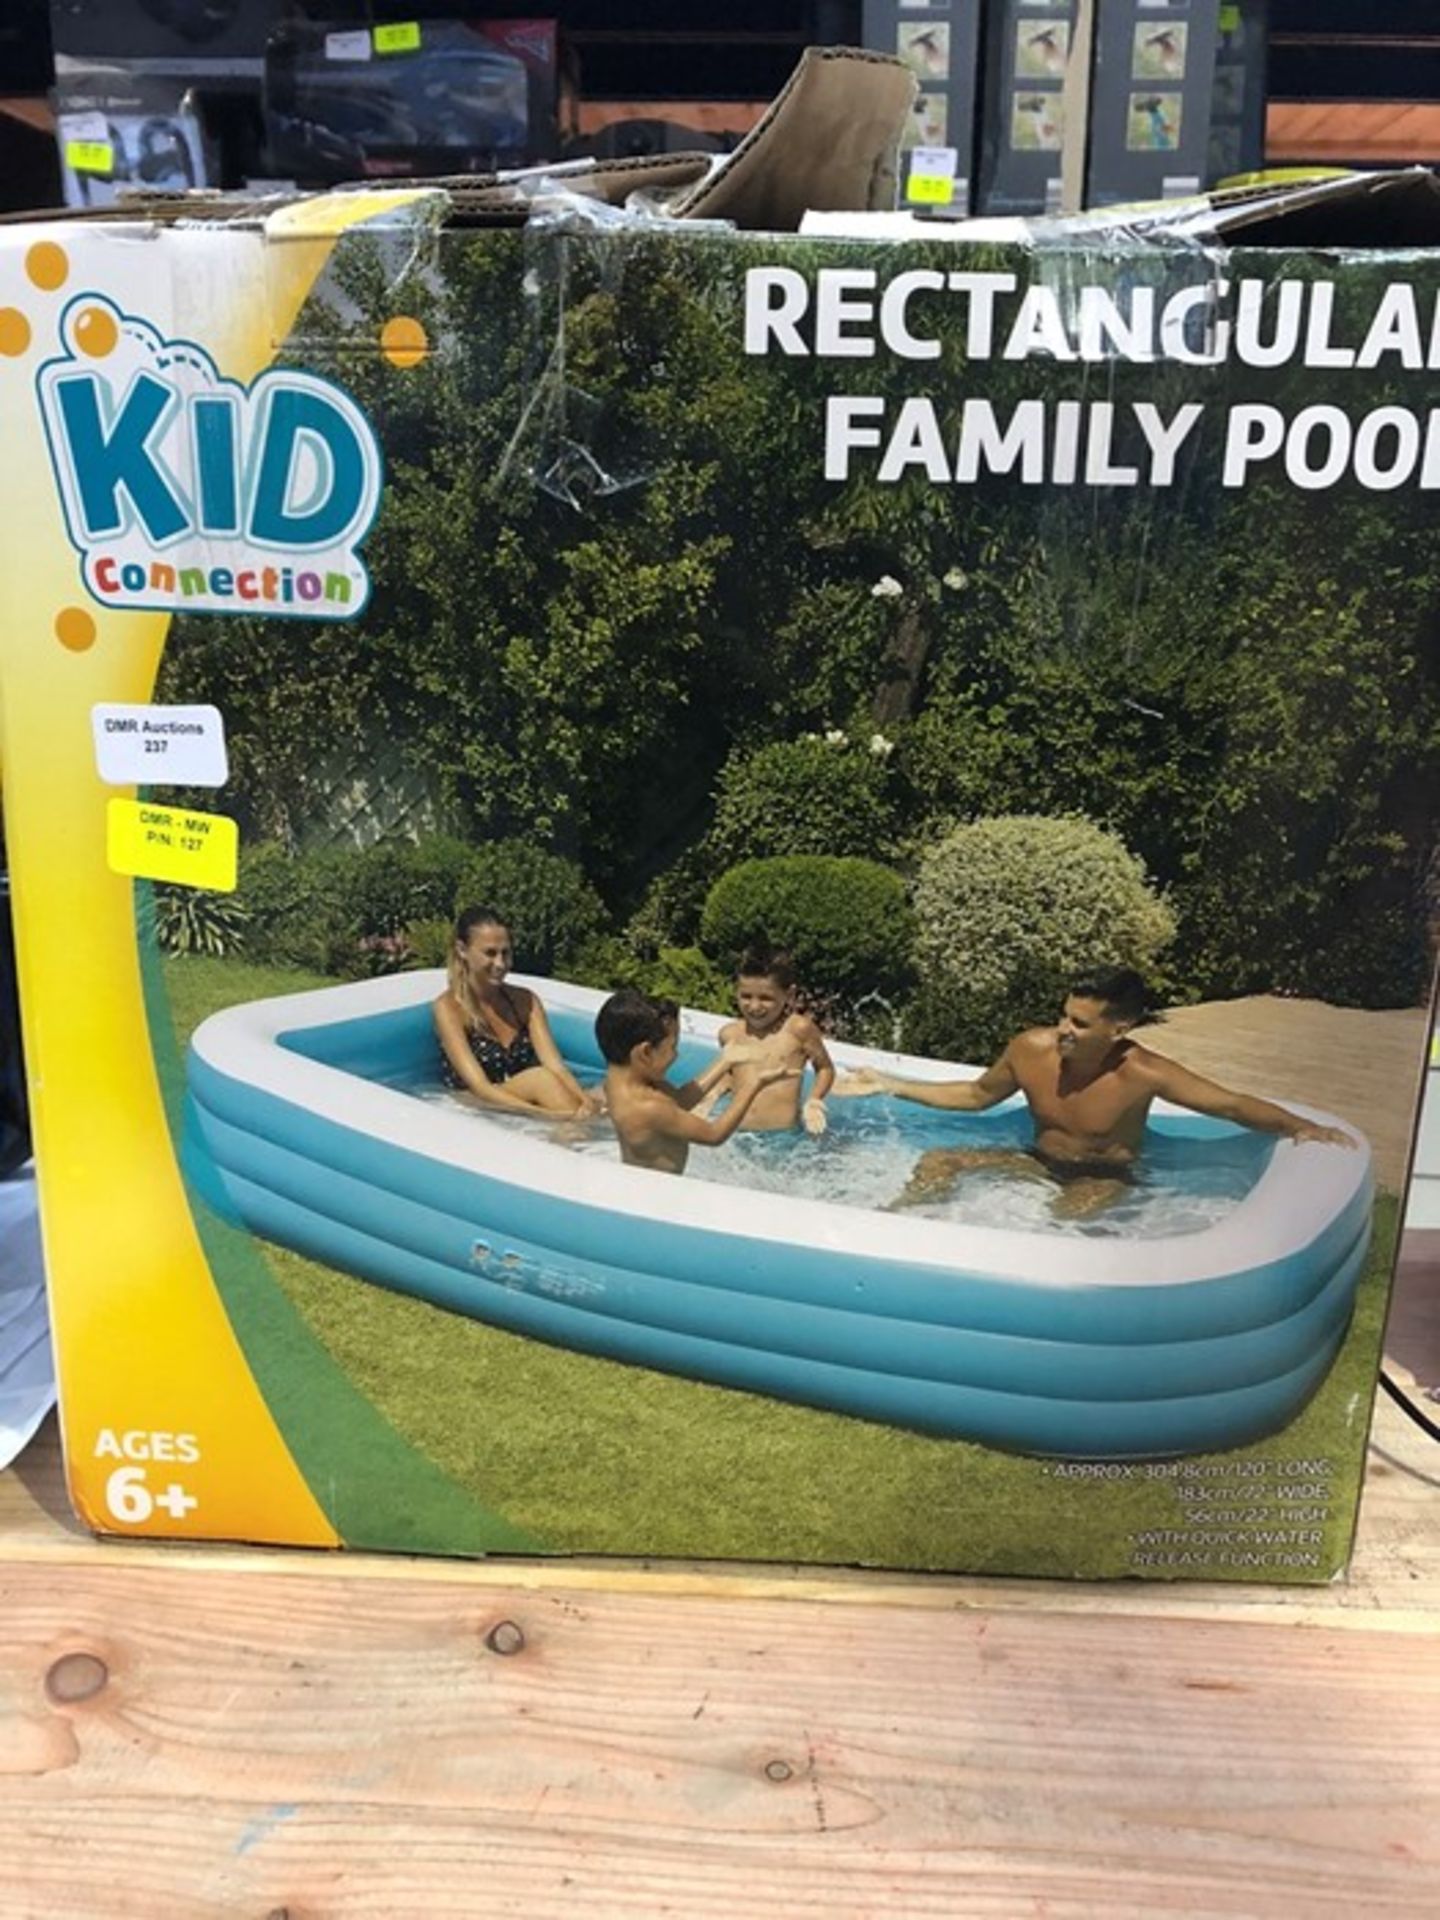 1 BOXED KID CONNECTION RECTANGULAR FAMILY POOL / RRP £24.99 (PUBLIC VIEWING AVAILABLE)